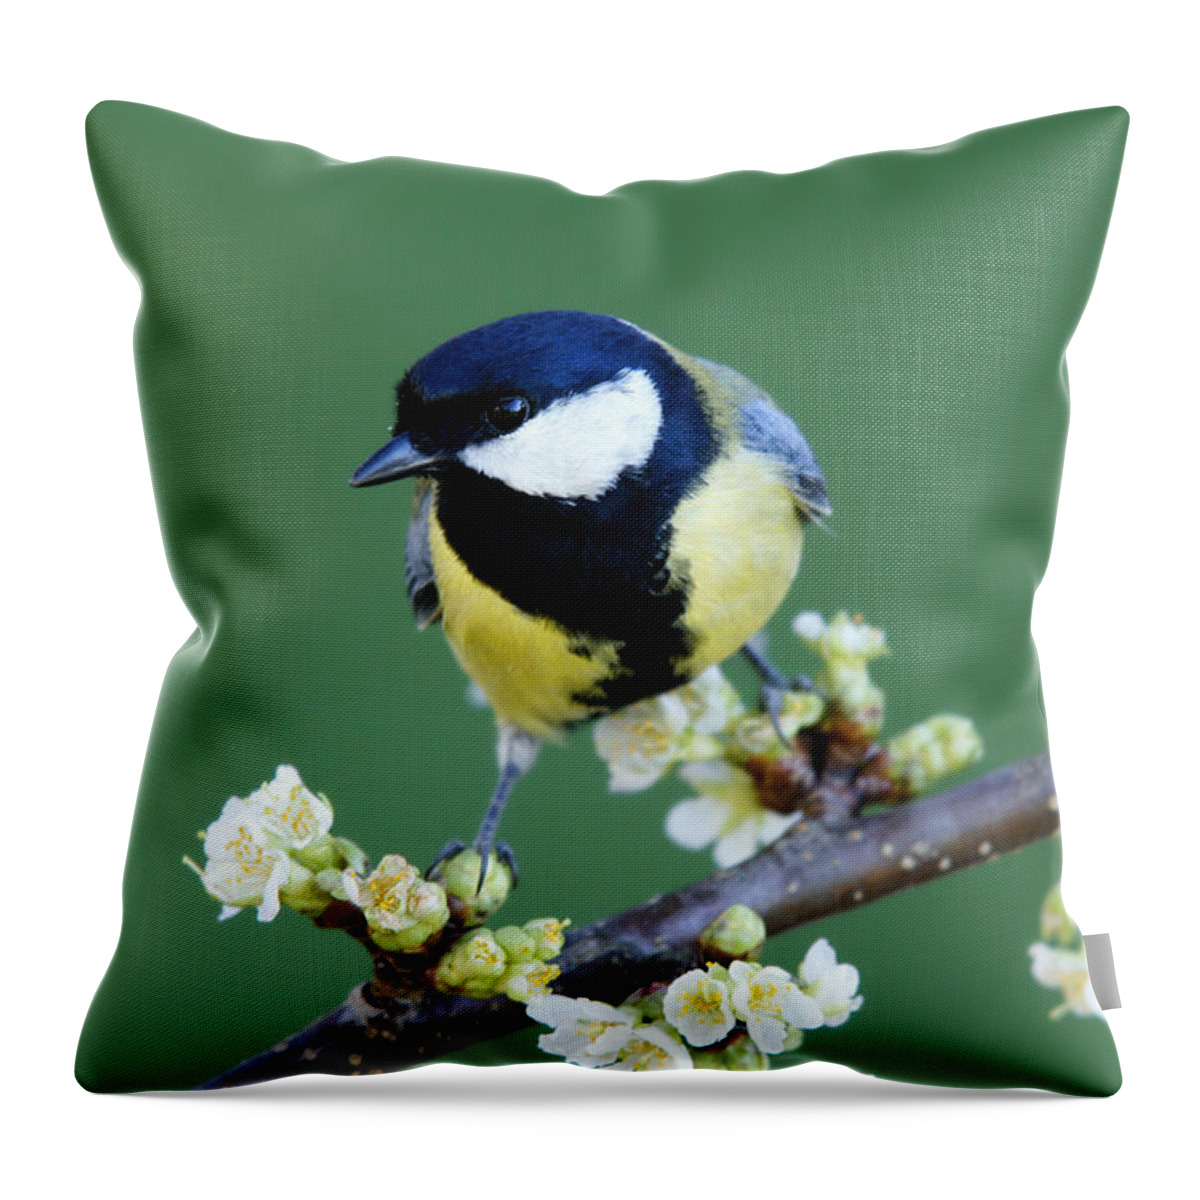 Songbird Throw Pillow featuring the photograph Great Tit On A Blossoming Twig #1 by Schnuddel